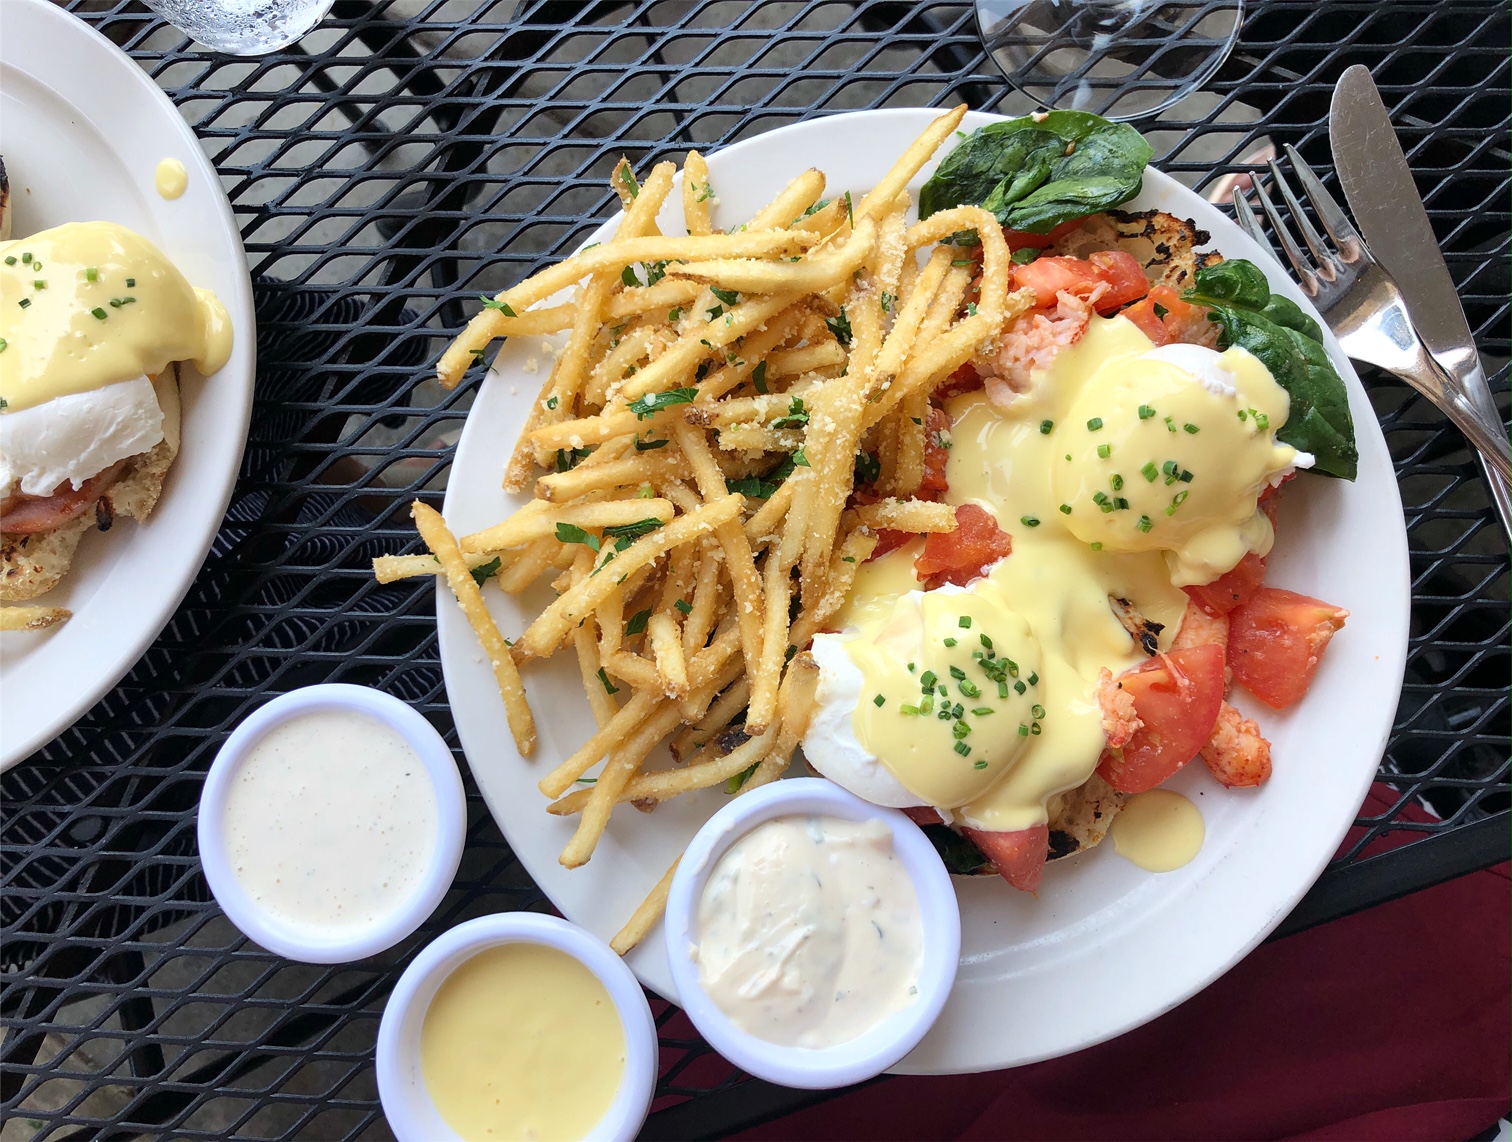 On an outdoor patio, there is a white plate with lobster egg benedict and thin fries as a side. There are three mini white cups of sauce. Photo by Alyssa Buckley.